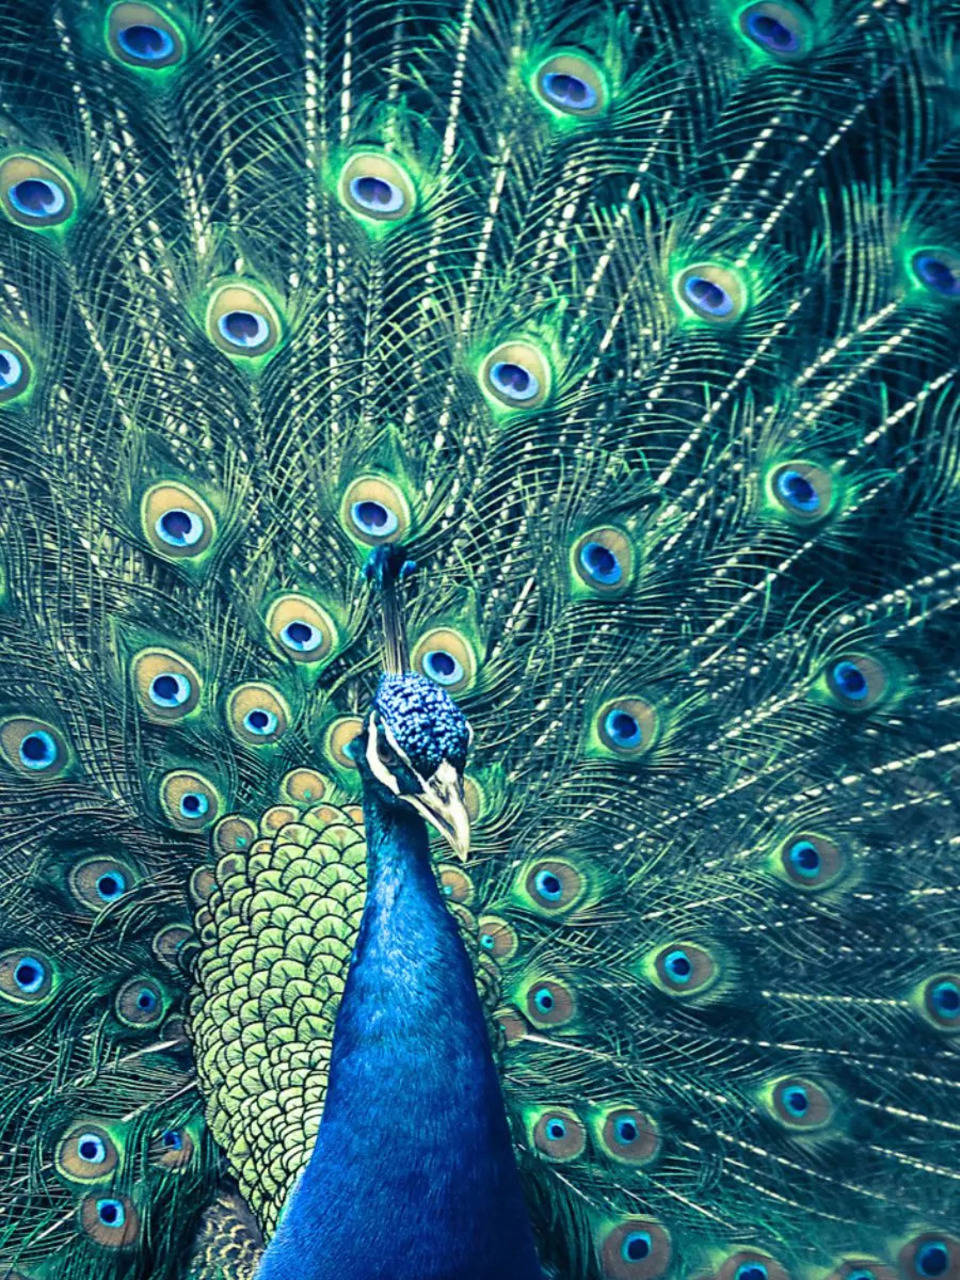 Peacock feather benefits for your home